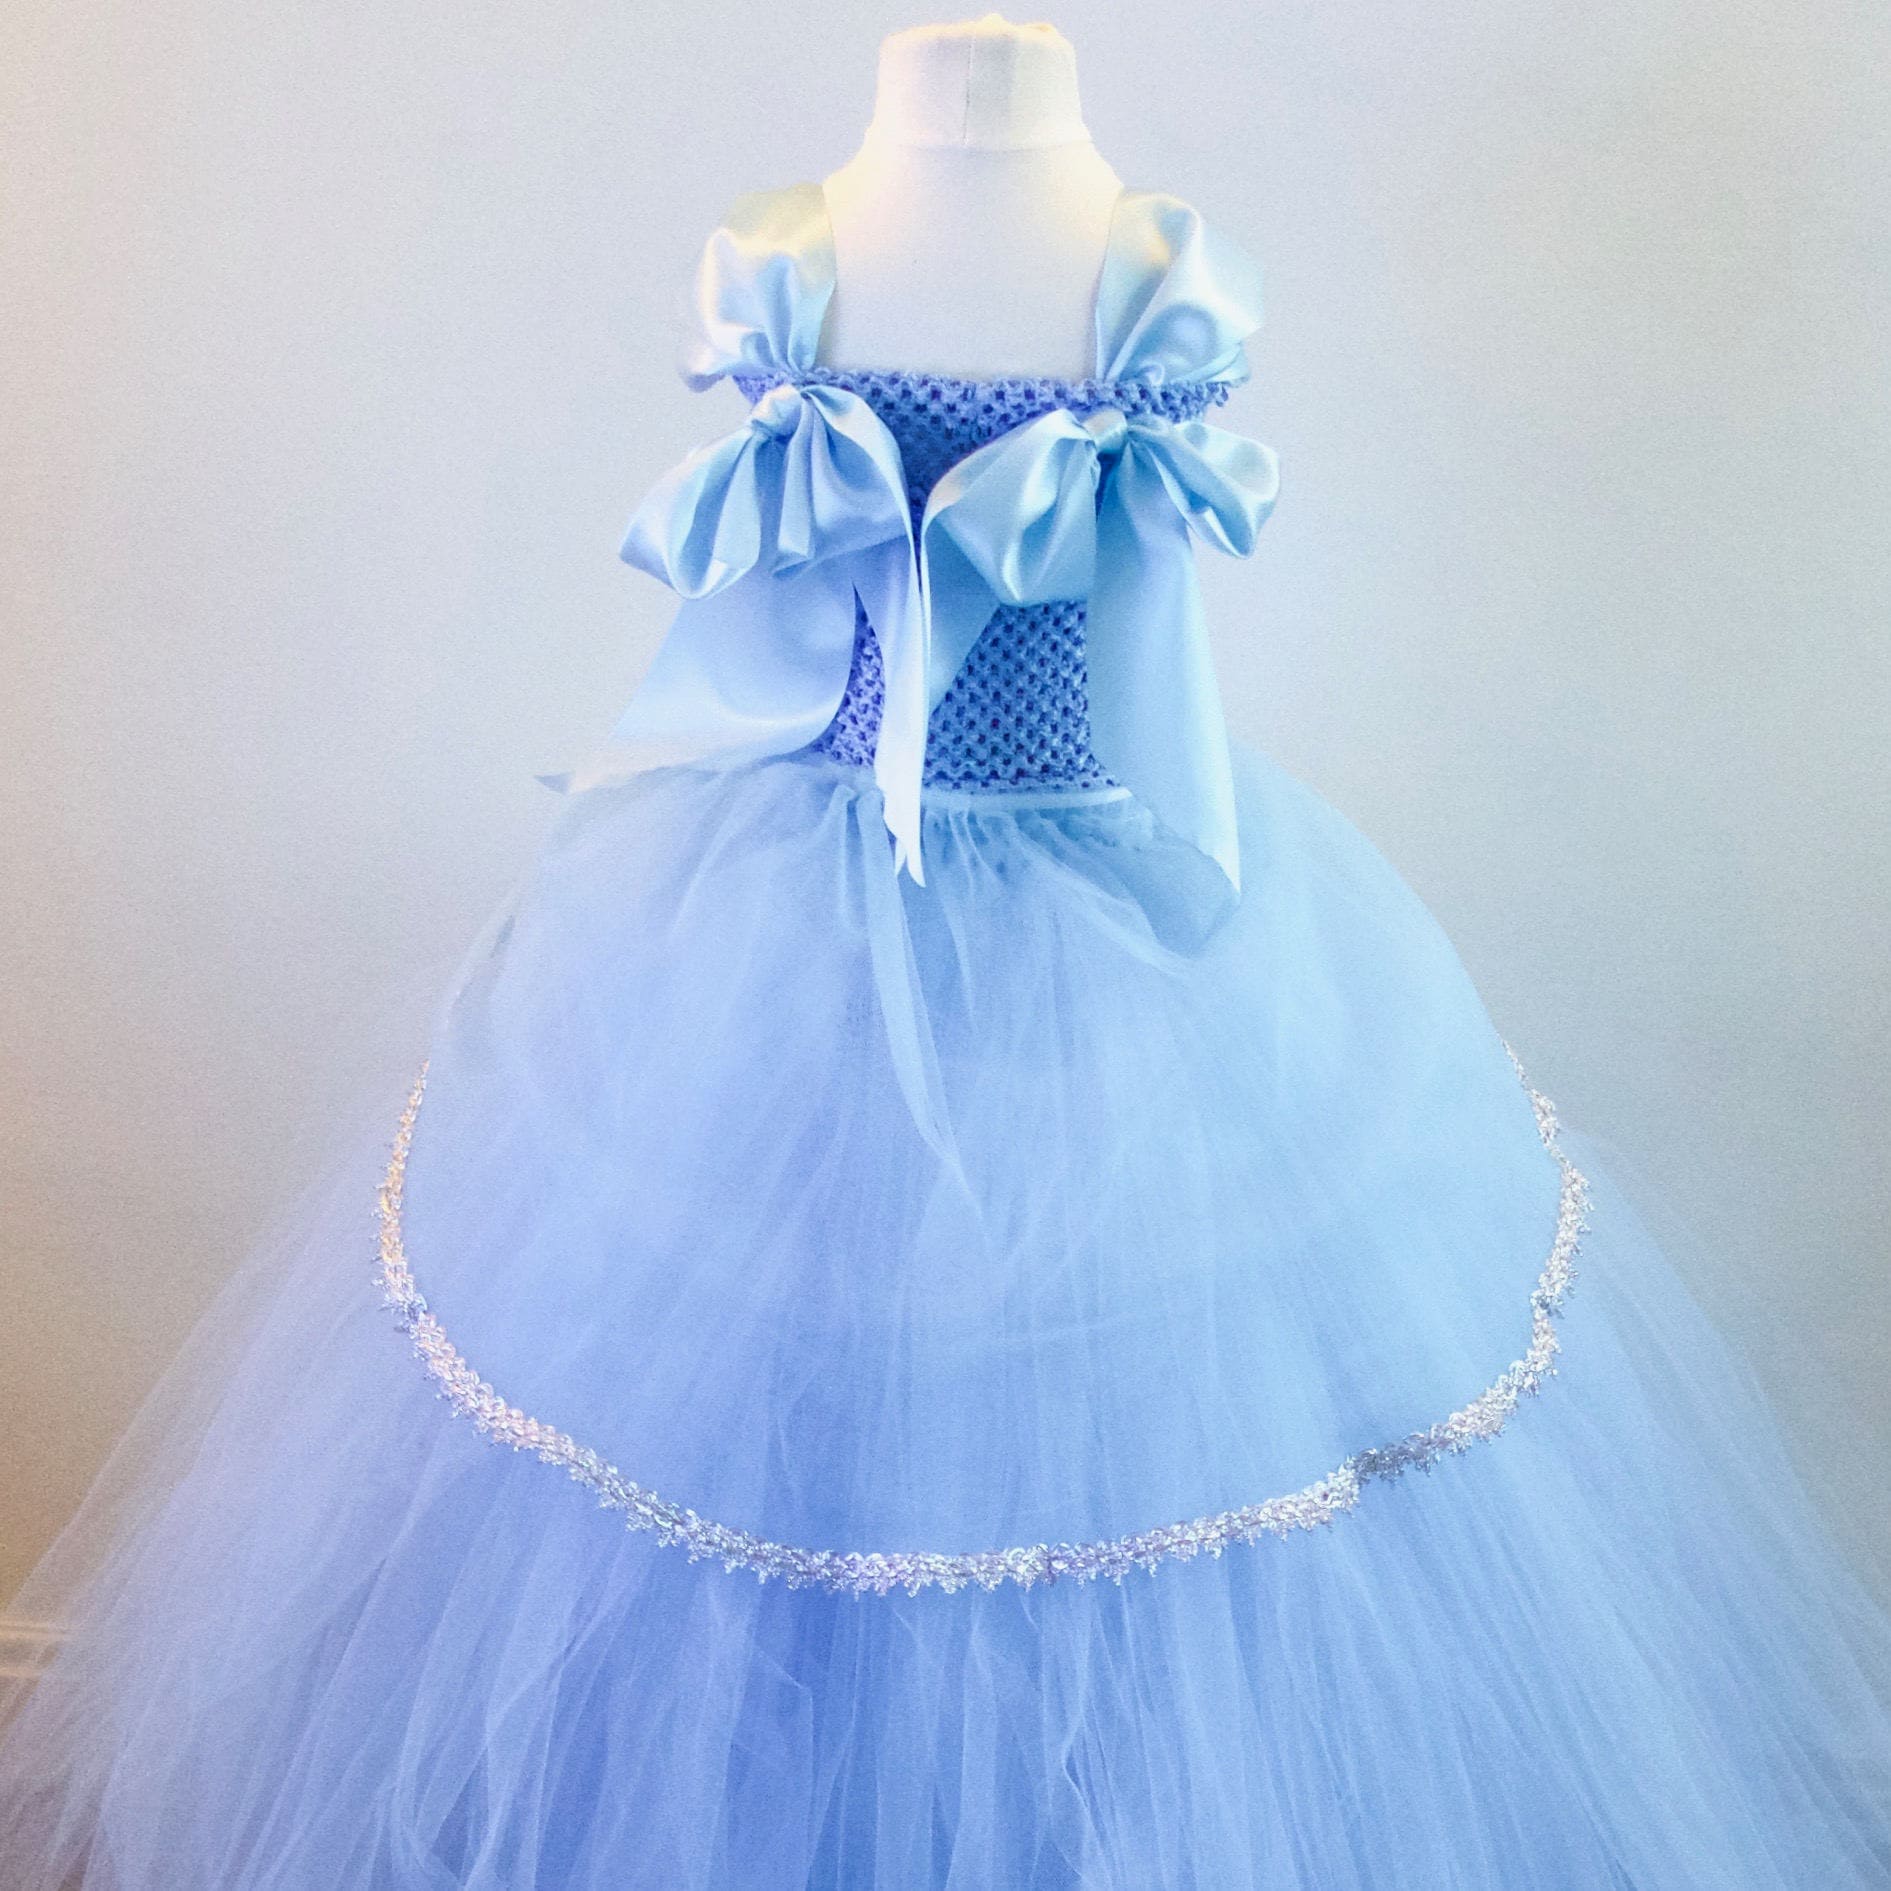 Girl's Cinderella Inspired Dress Costume Made to Measure - Etsy UK